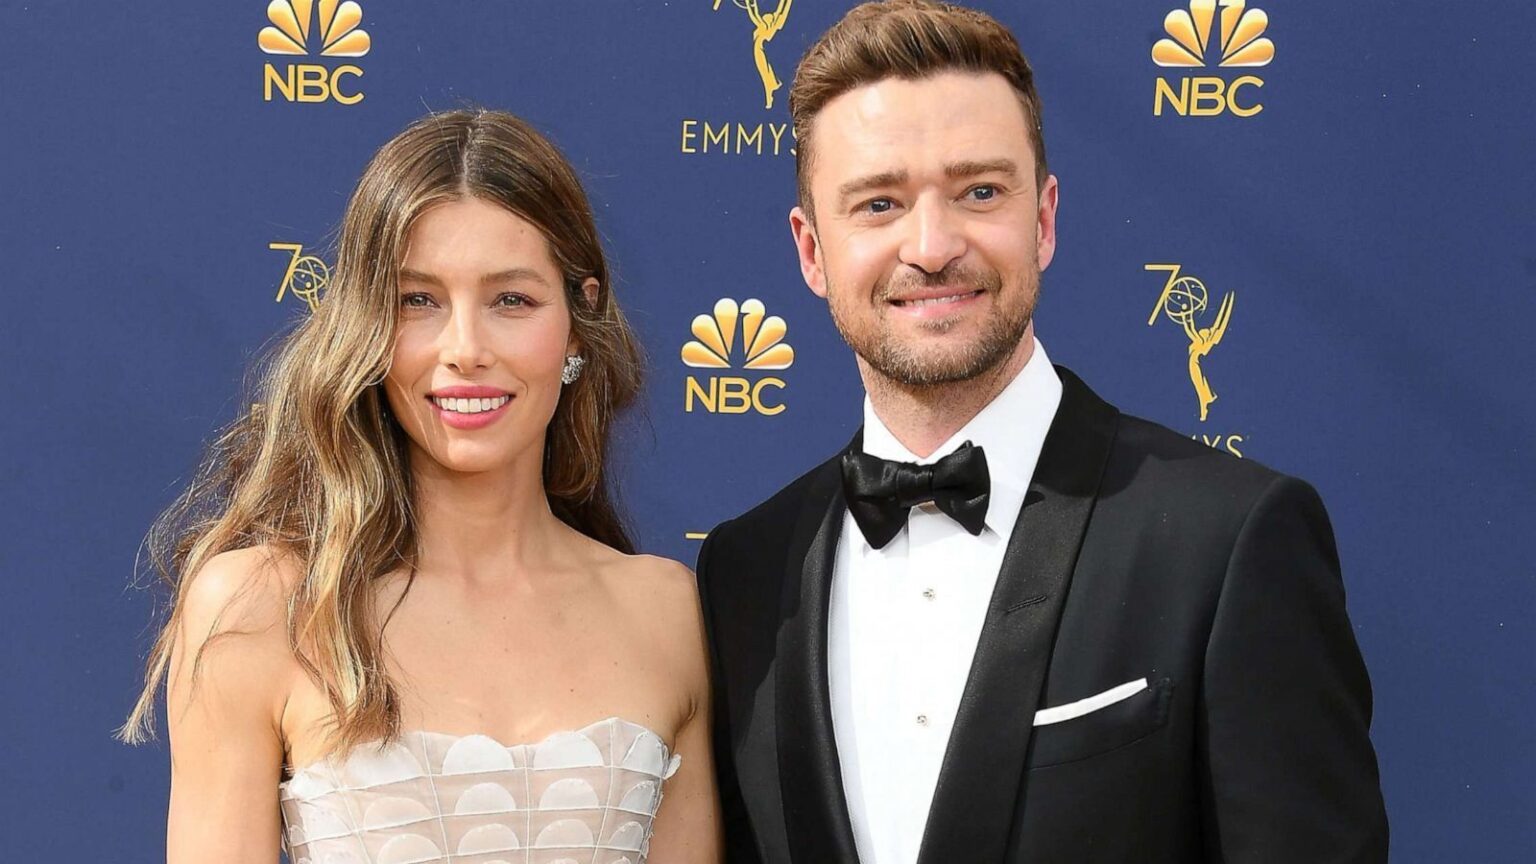 2021 is off to a good start for Justin Timberlake and Jessica Biel. Learn more about their surprise second baby here.